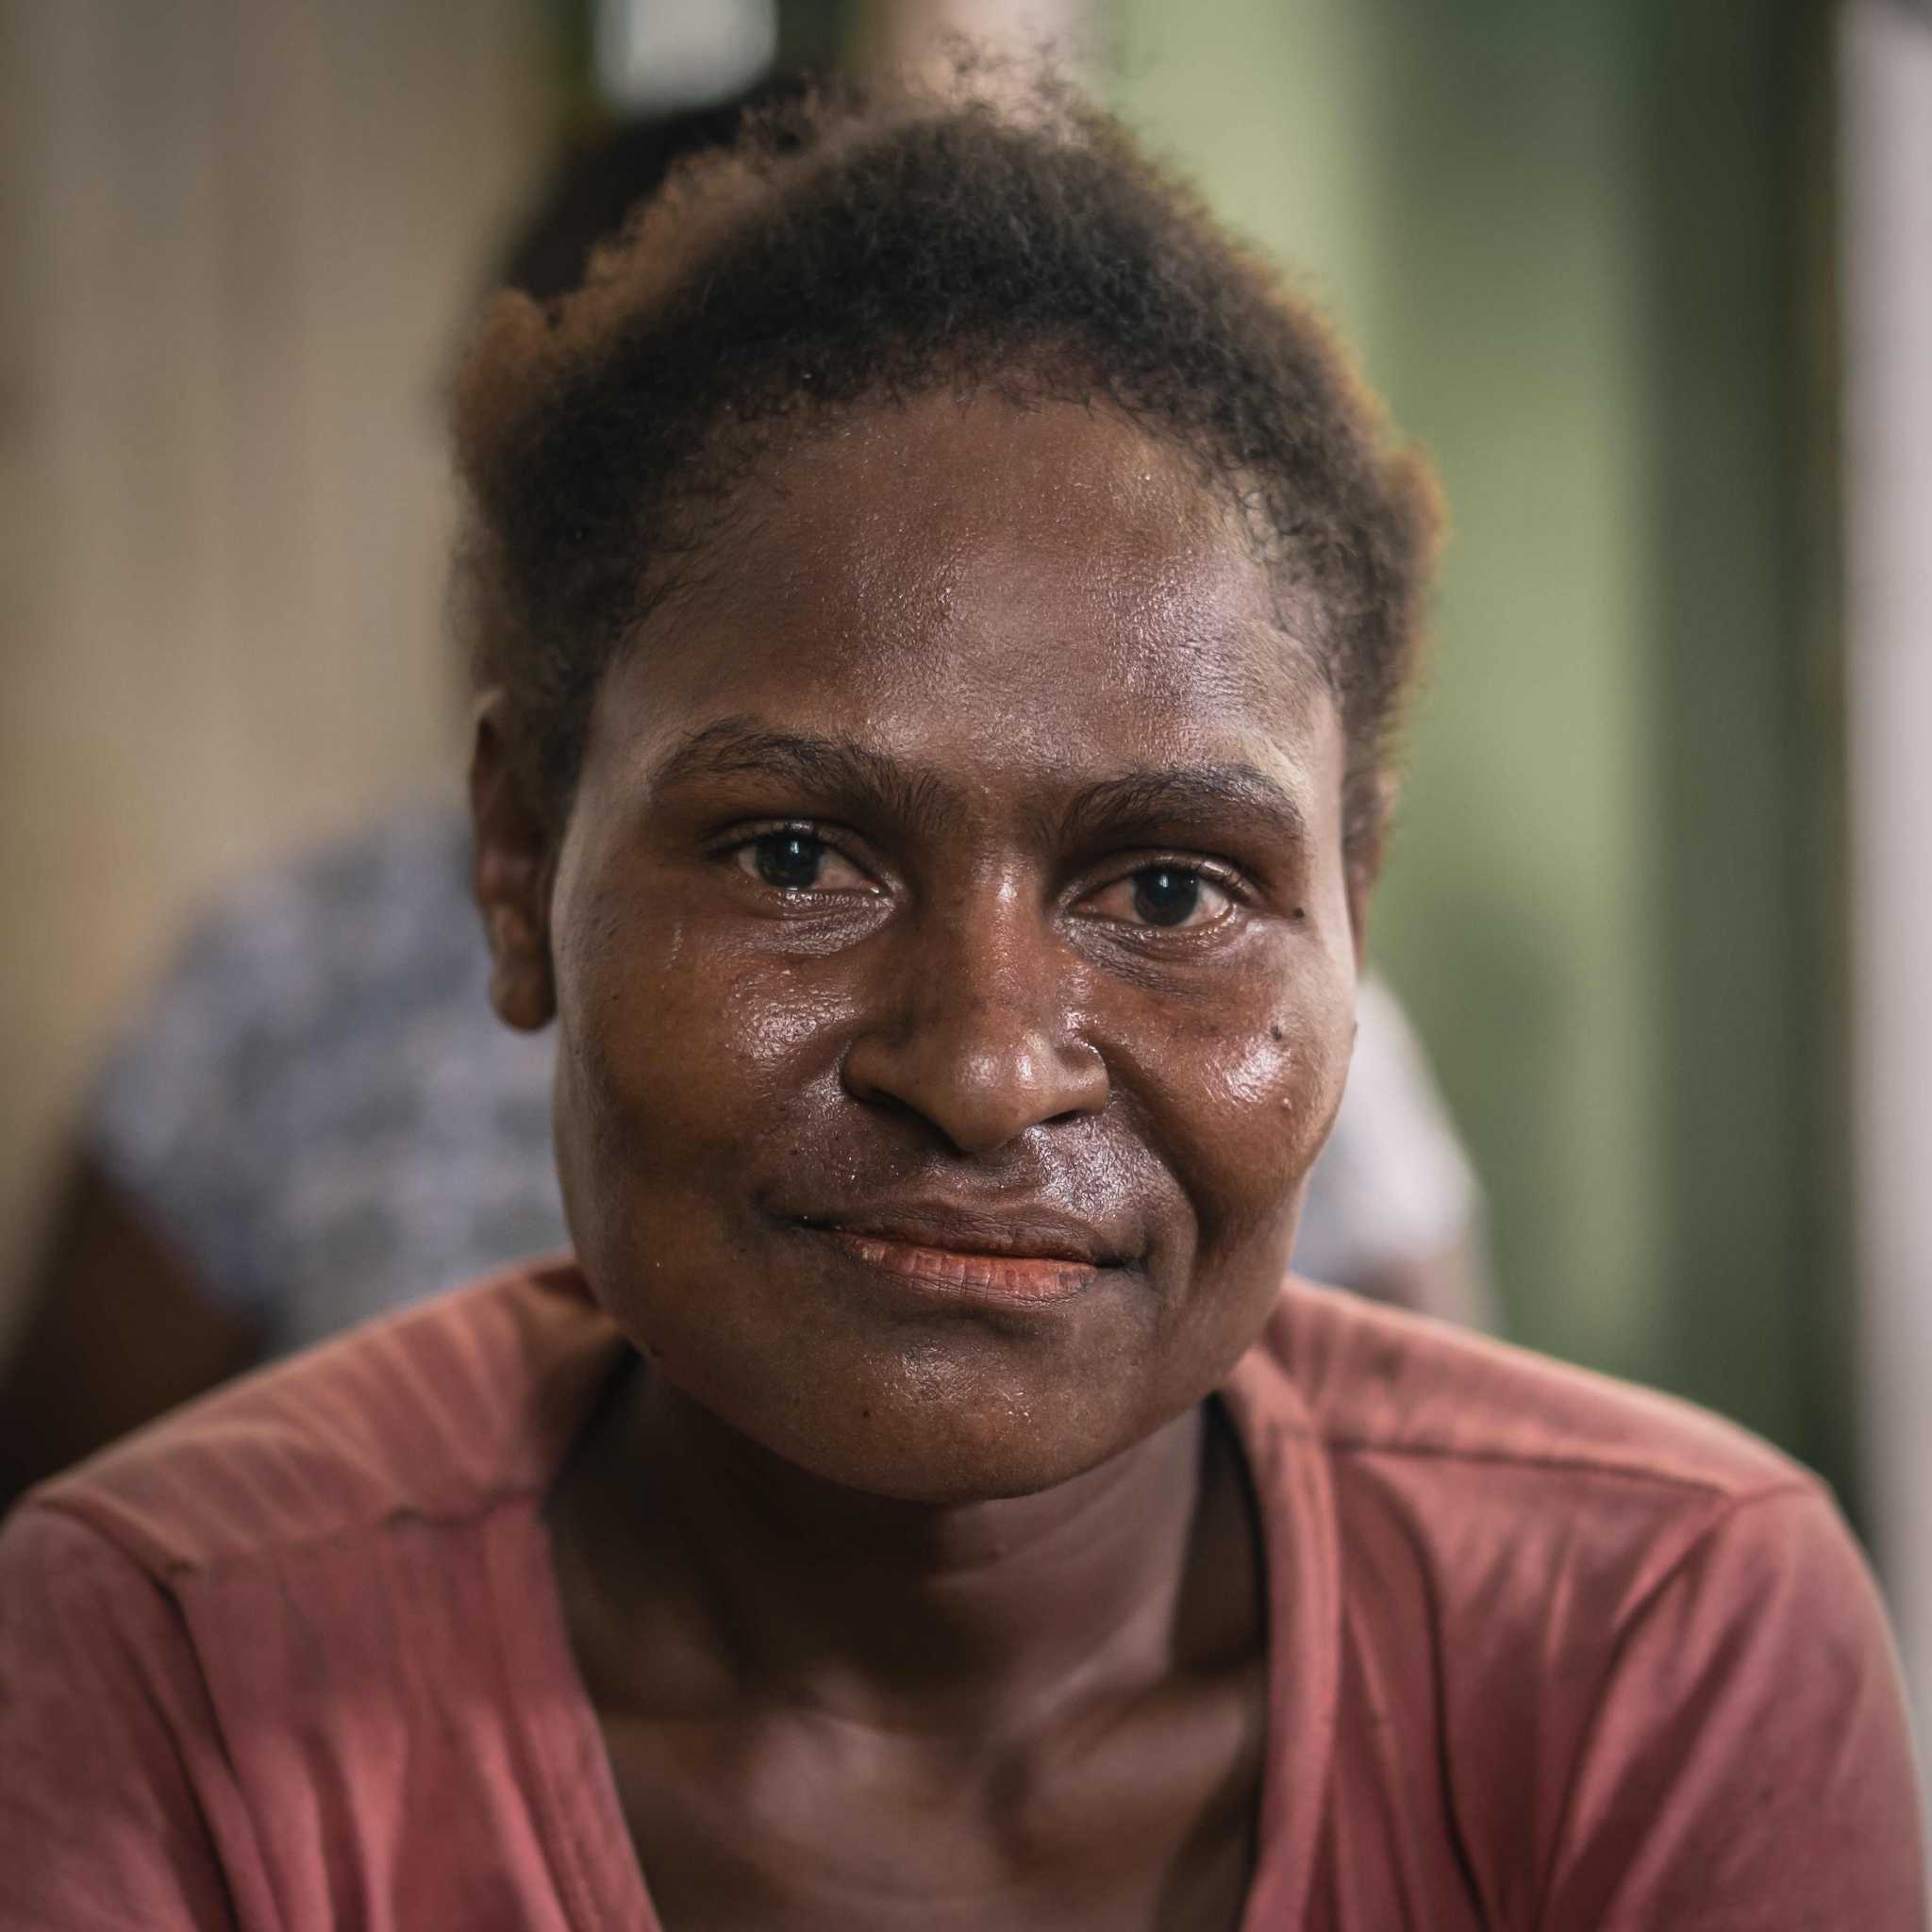 Persila Samkakai lost her first child, Herlina, in early 2012. Herlina had suffered from malnutrition in the months leading up to her death. Persila now struggles to feed her other two children due to the loss of the Marind’s traditional food sources.